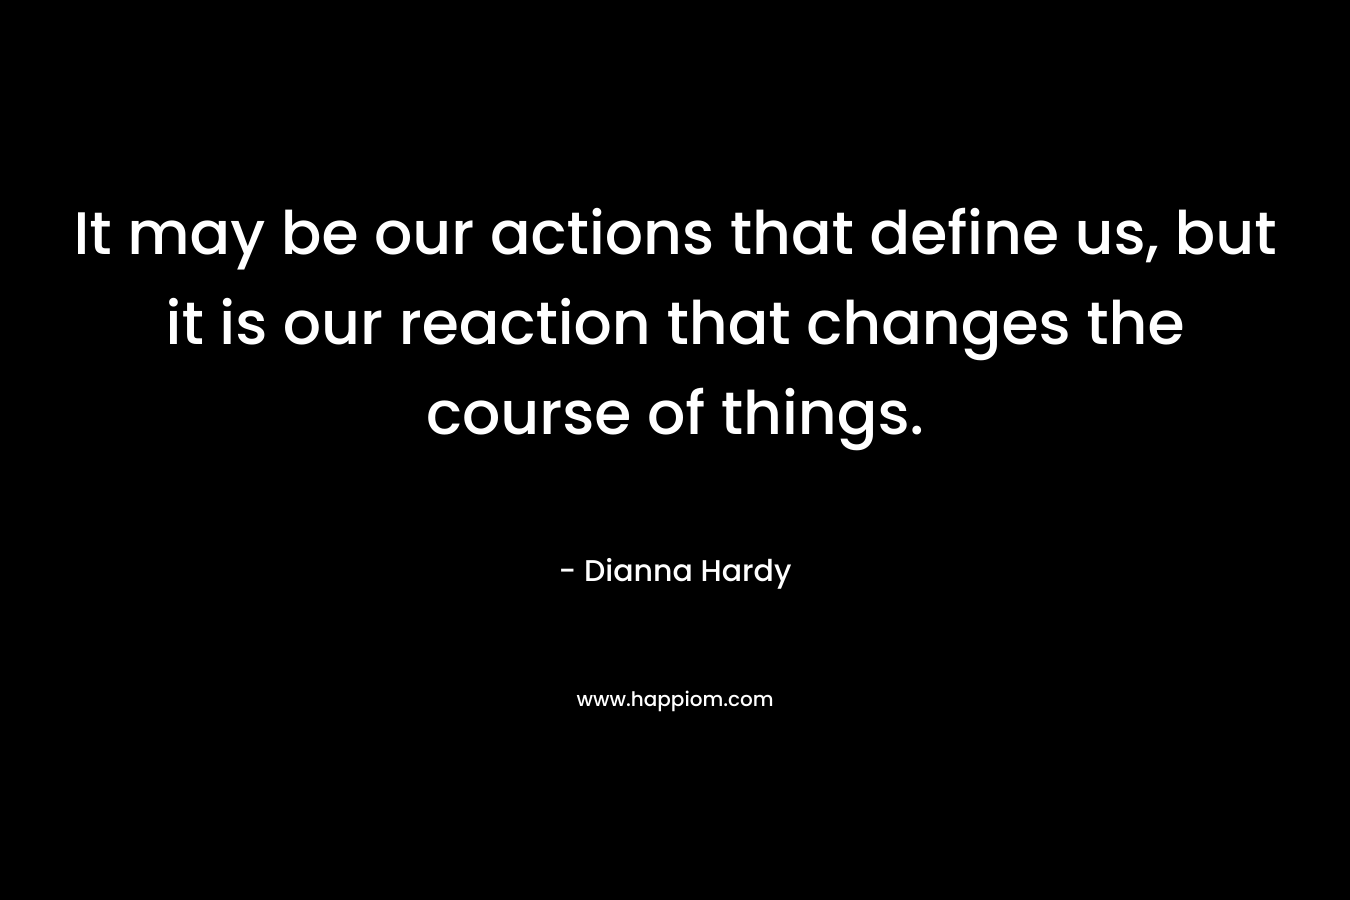 It may be our actions that define us, but it is our reaction that changes the course of things.